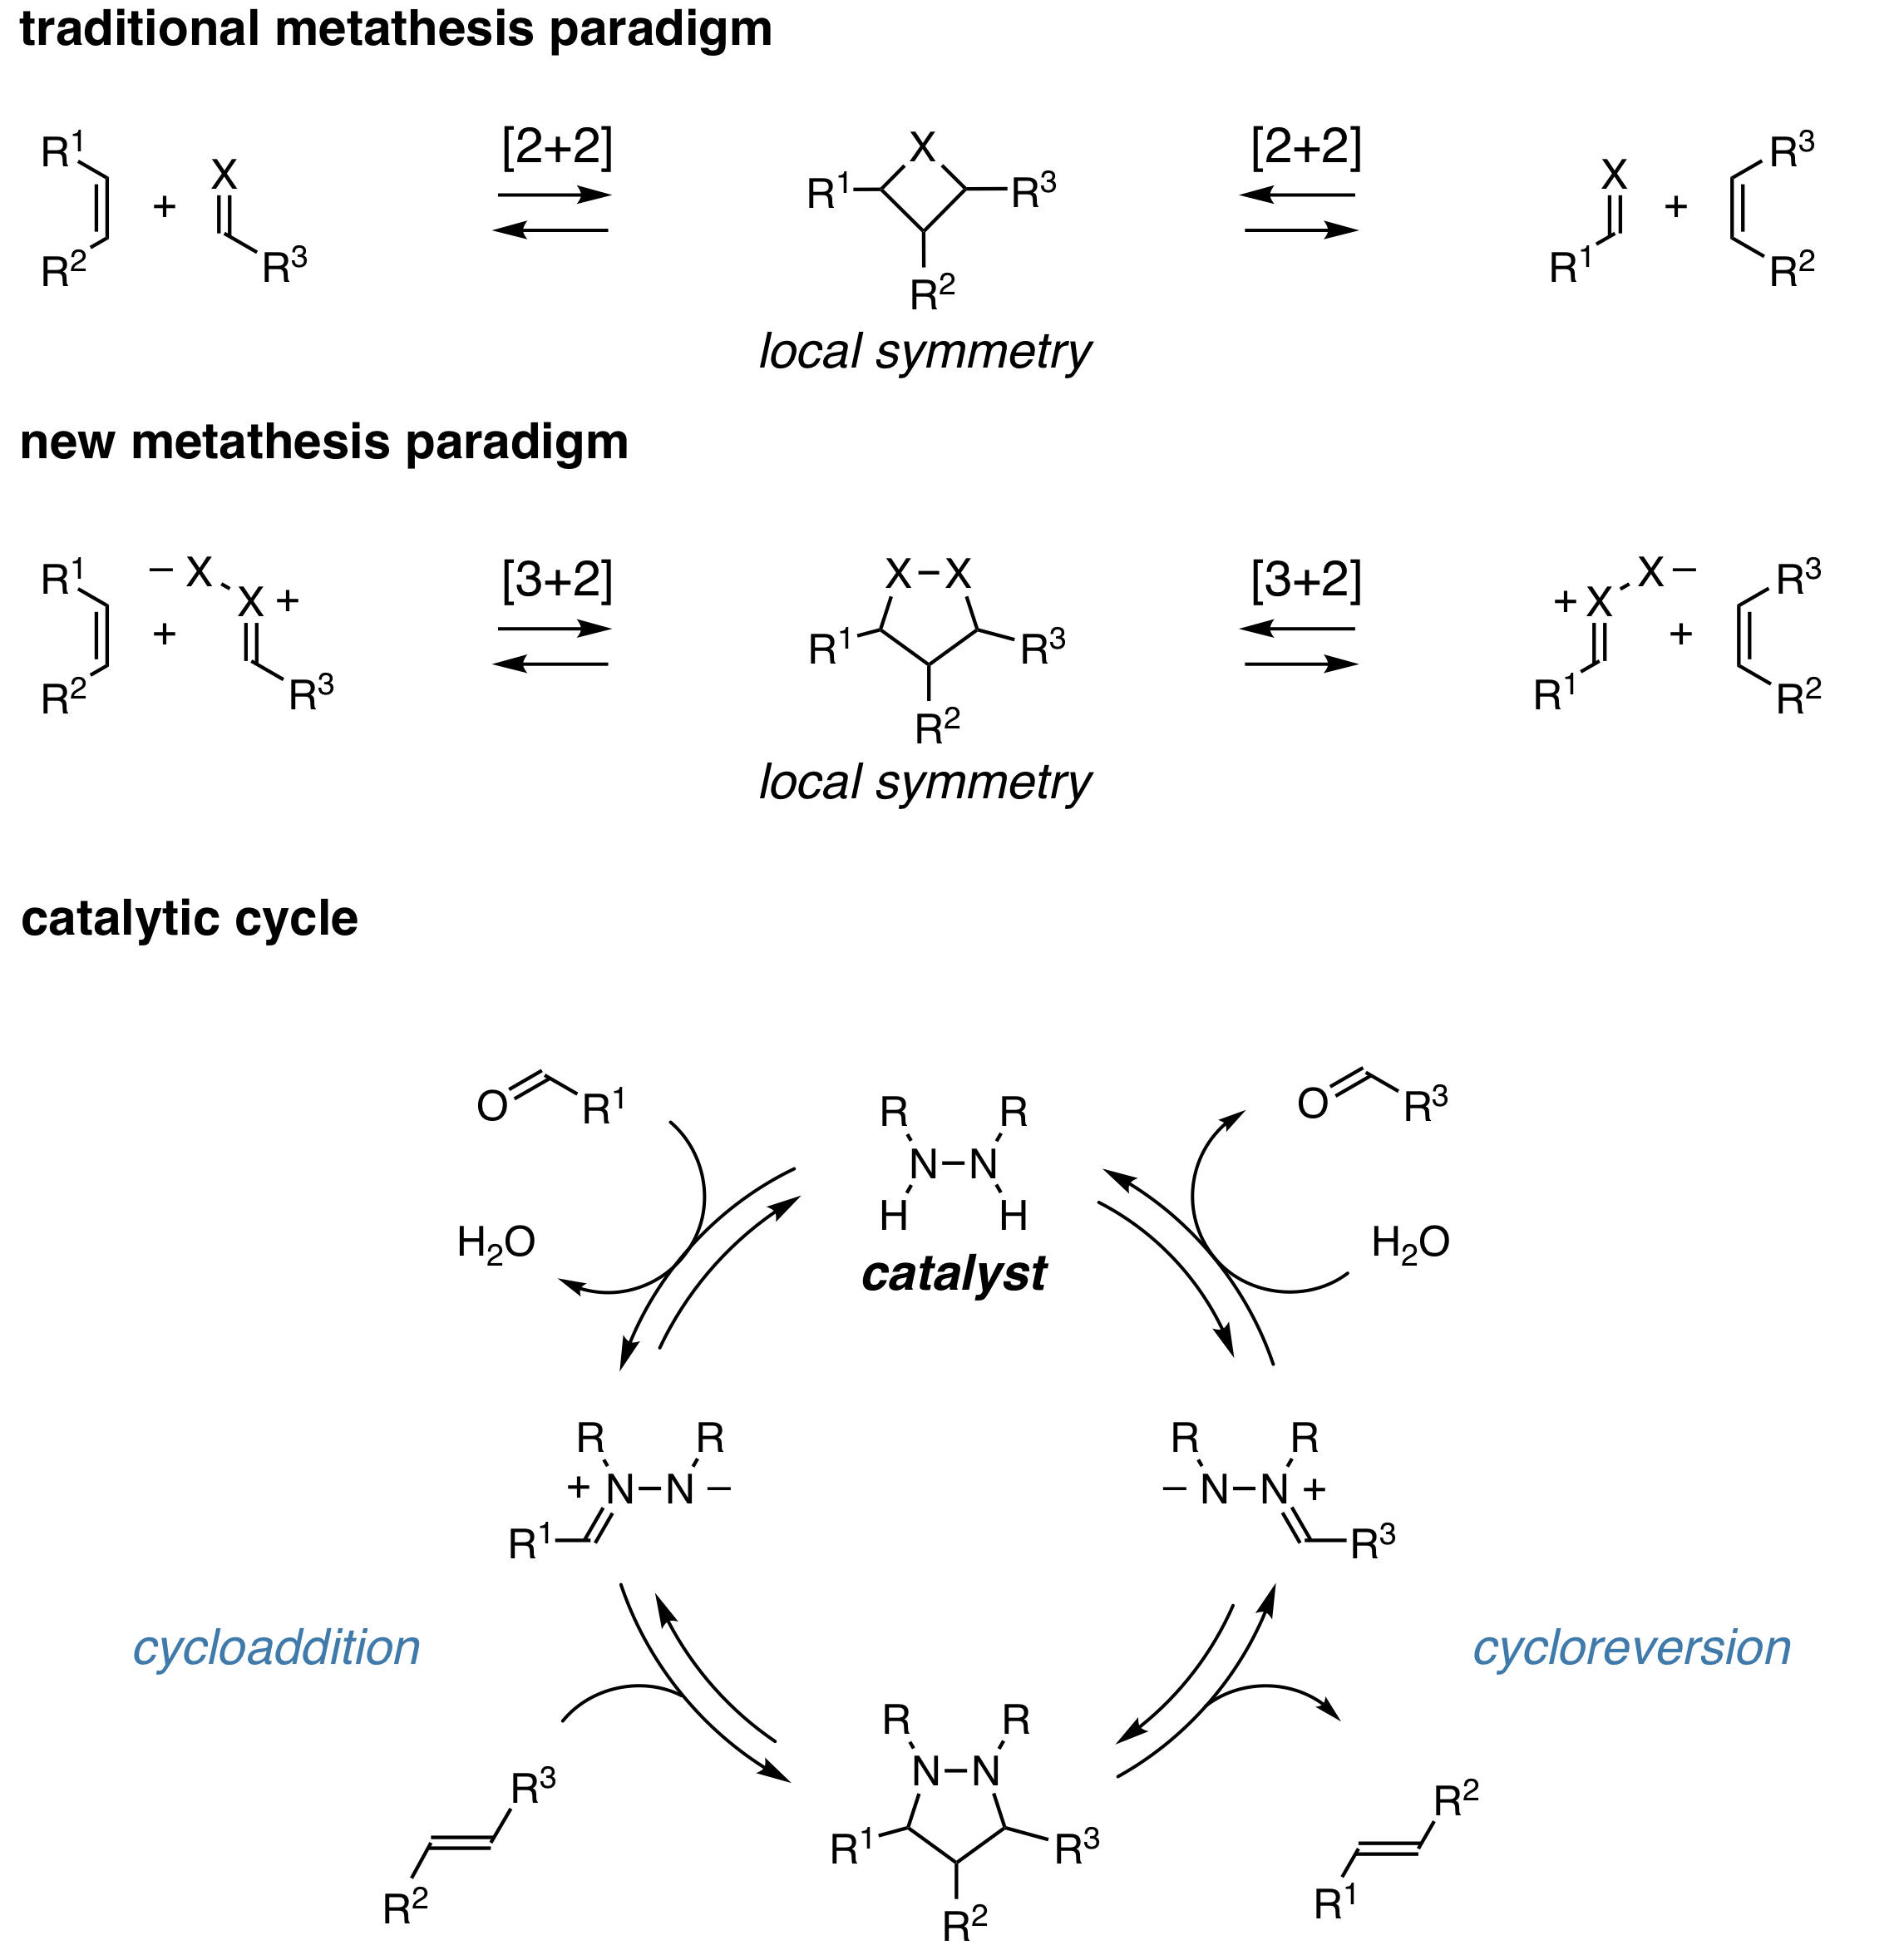 Domino enyne metathesis en route to skeletally diverse, privileged  scaffolds: synthesis of the tricyclic core of pseudolaric acid F - Organic  Chemistry Frontiers (RSC Publishing) DOI:10.1039/C9QO00477G